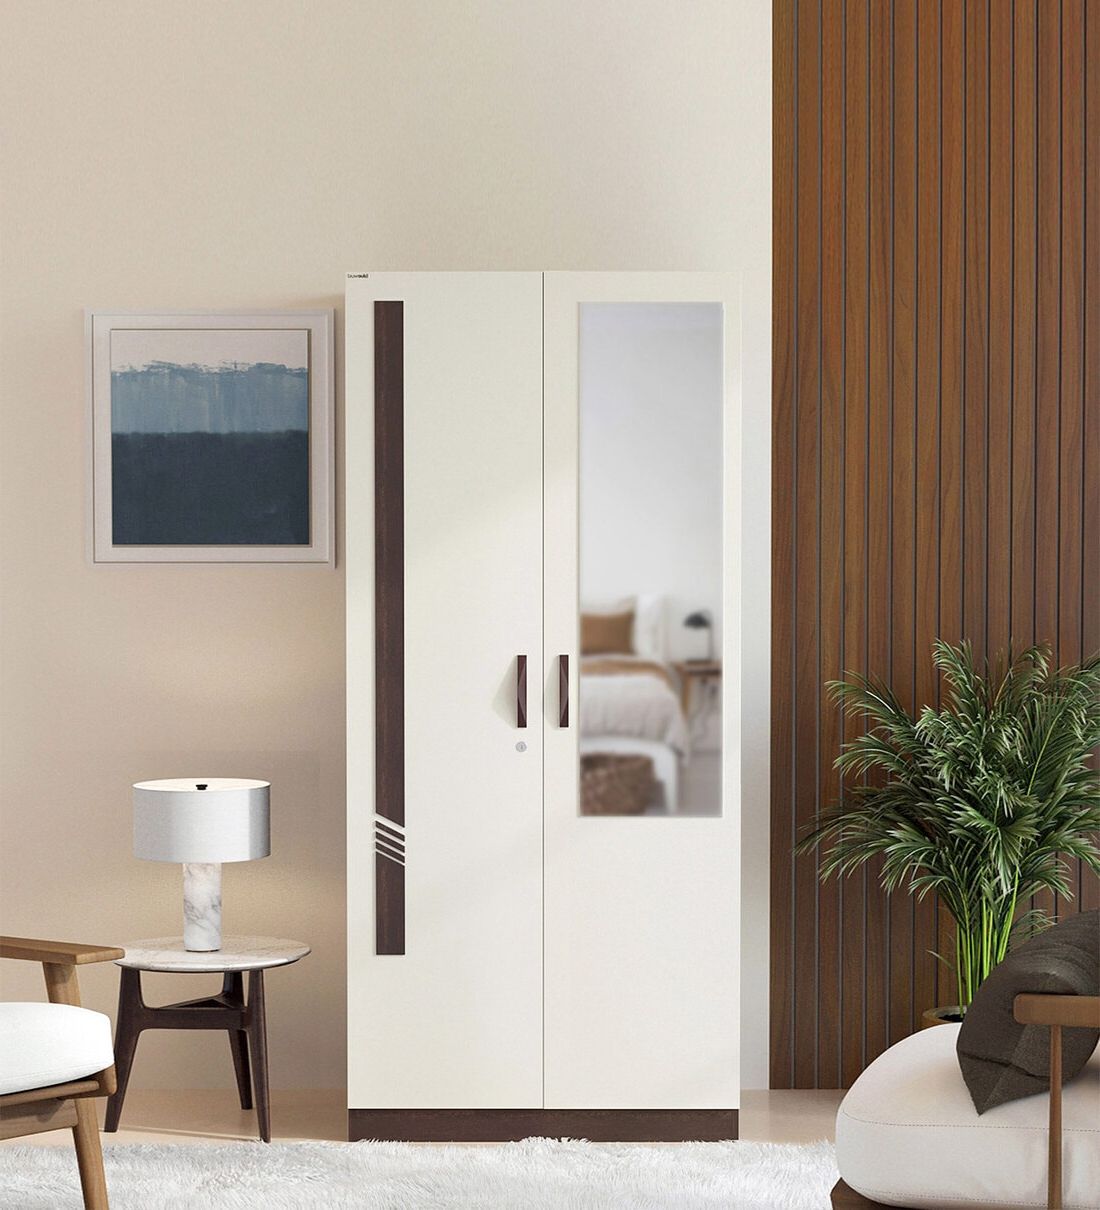 Buy Andrie 2 Door Wardrobe In Wenge & White Finish With Mirror At 26% Off Bluewud | Pepperfry Pertaining To 2 Door Wardrobes (Gallery 1 of 20)